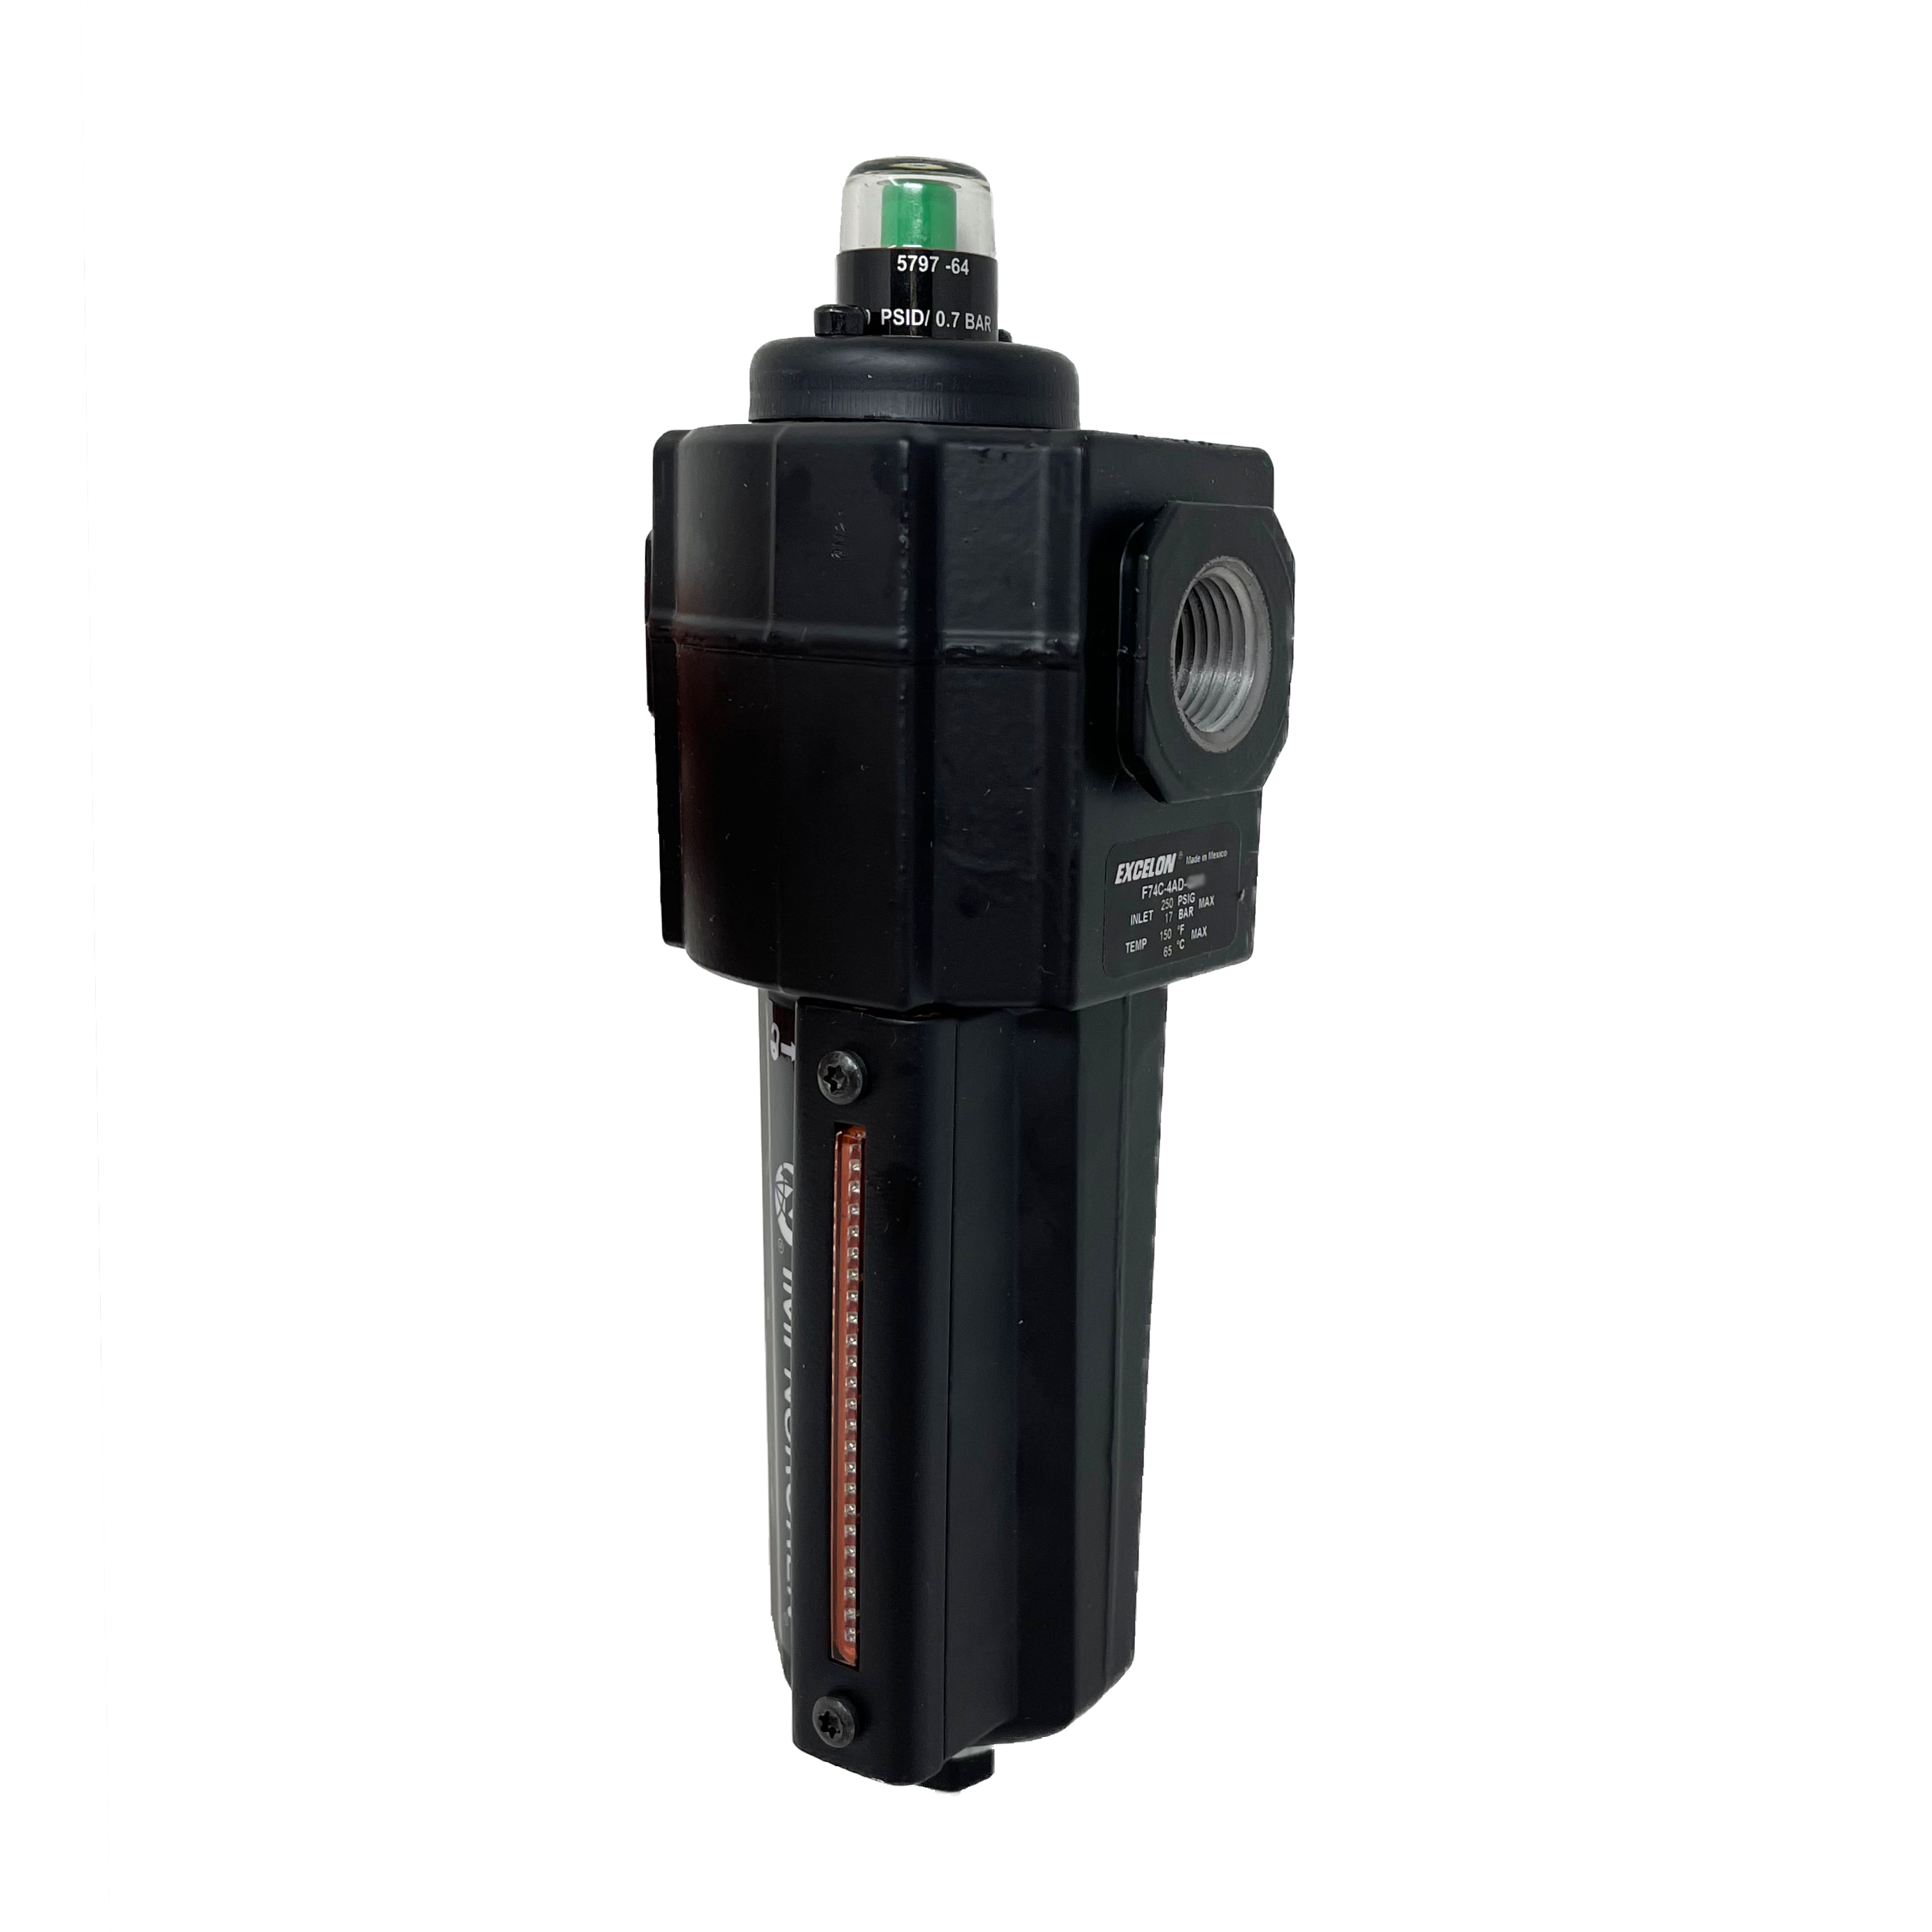 F74C-4AD-AD0 : Norgren Excelon Coalescing Filter, 1/2" NPT, With Mechanical Indicator, Auto Drain, Metal Bowl